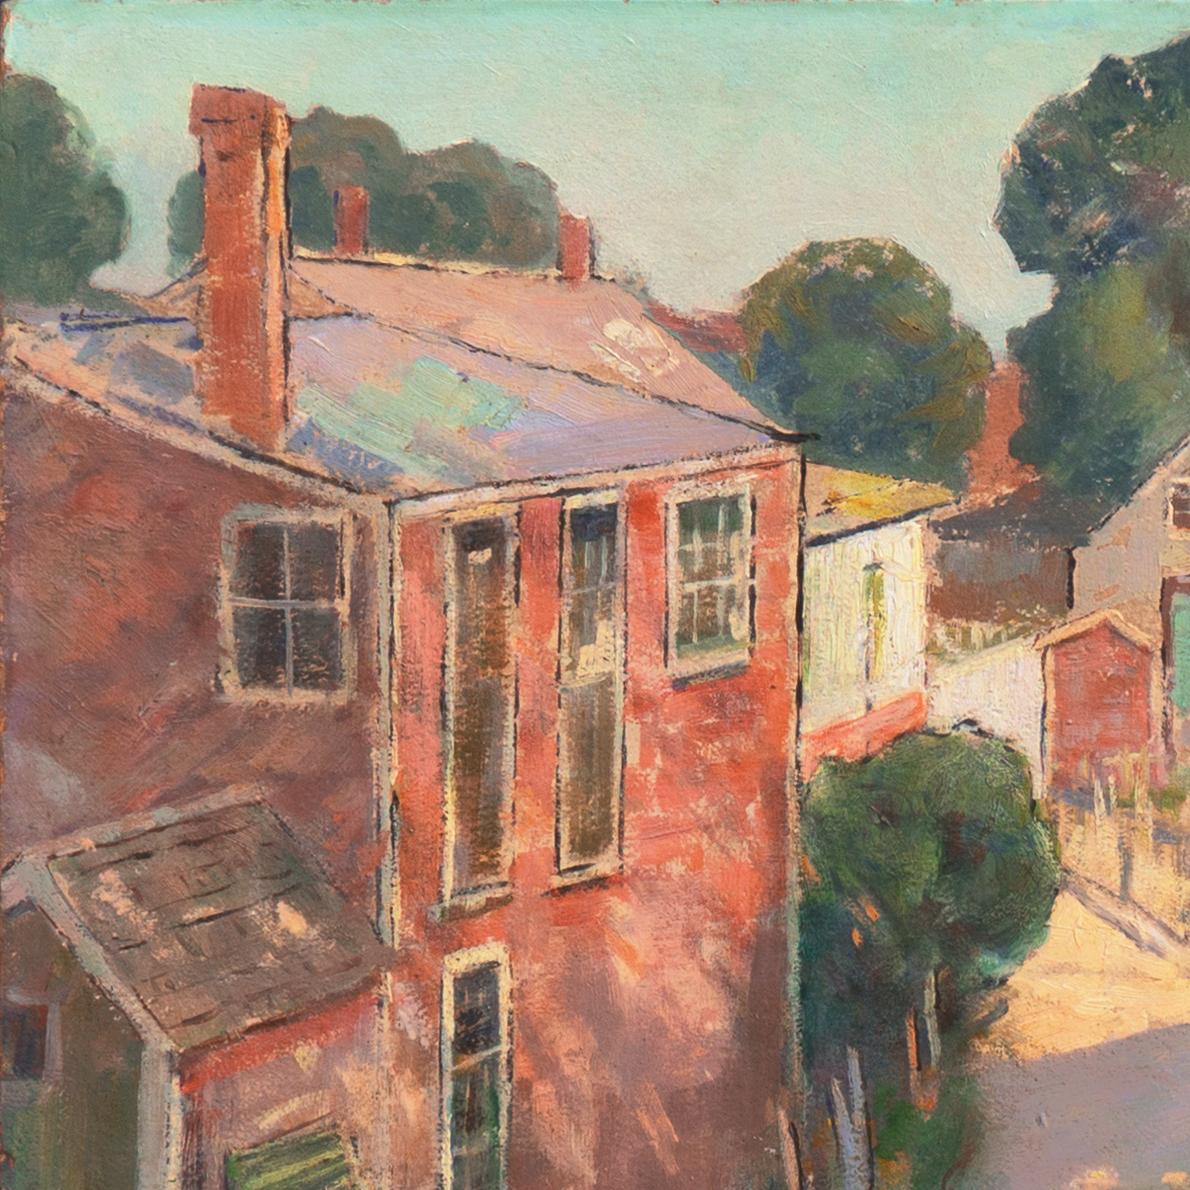 Signed lower left, 'Pauline Palmer' (American, 1867-1938) and painted circa 1915, two years after the artist's first solo exhibition at the Art Institute of Chicago. 
Exhibited: Chicago Galleries Association and titled, 'Sunny Yards' (attached,